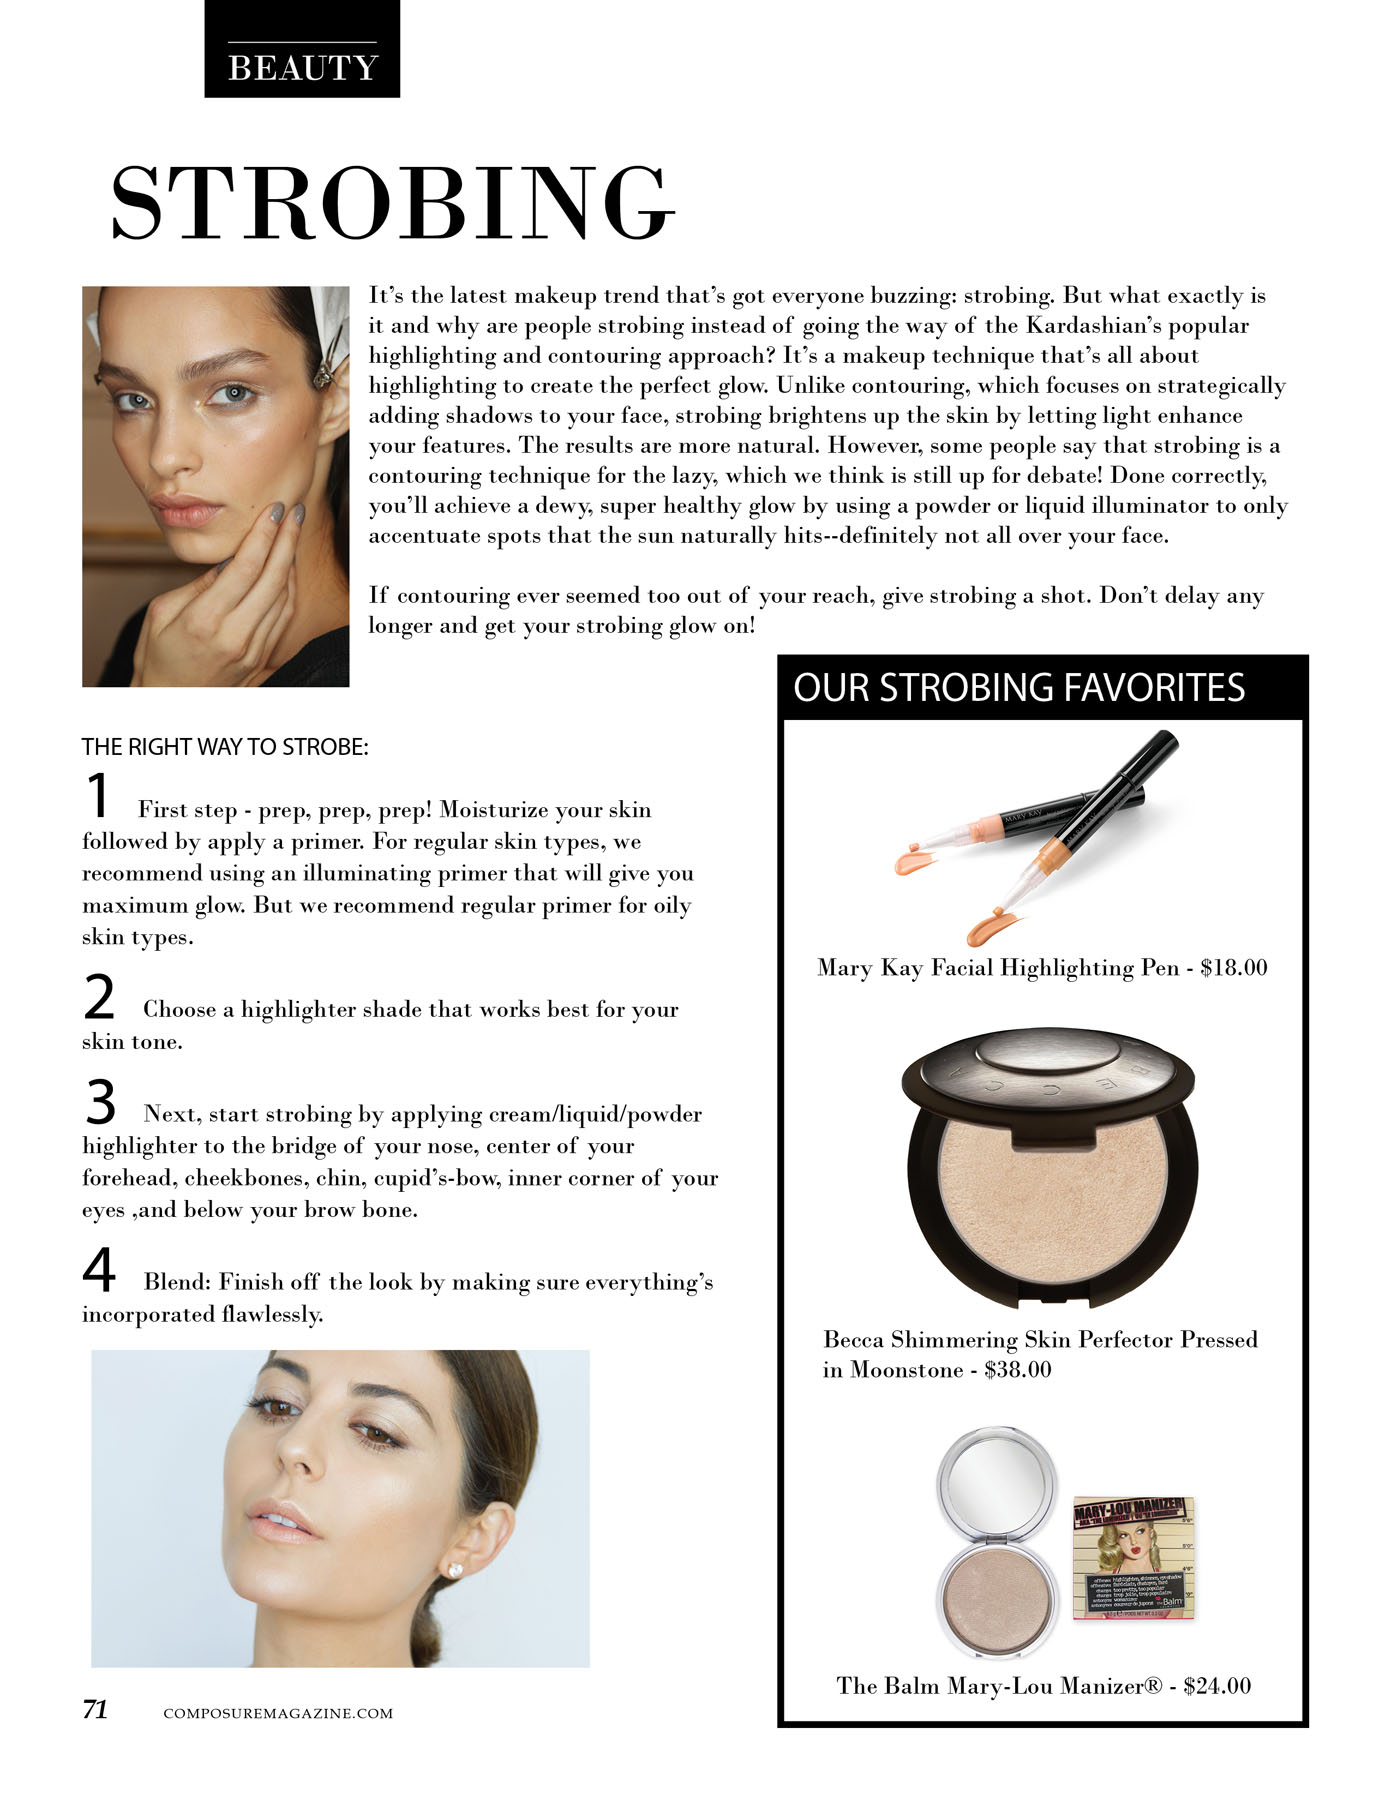 Strobing all-natural contouring